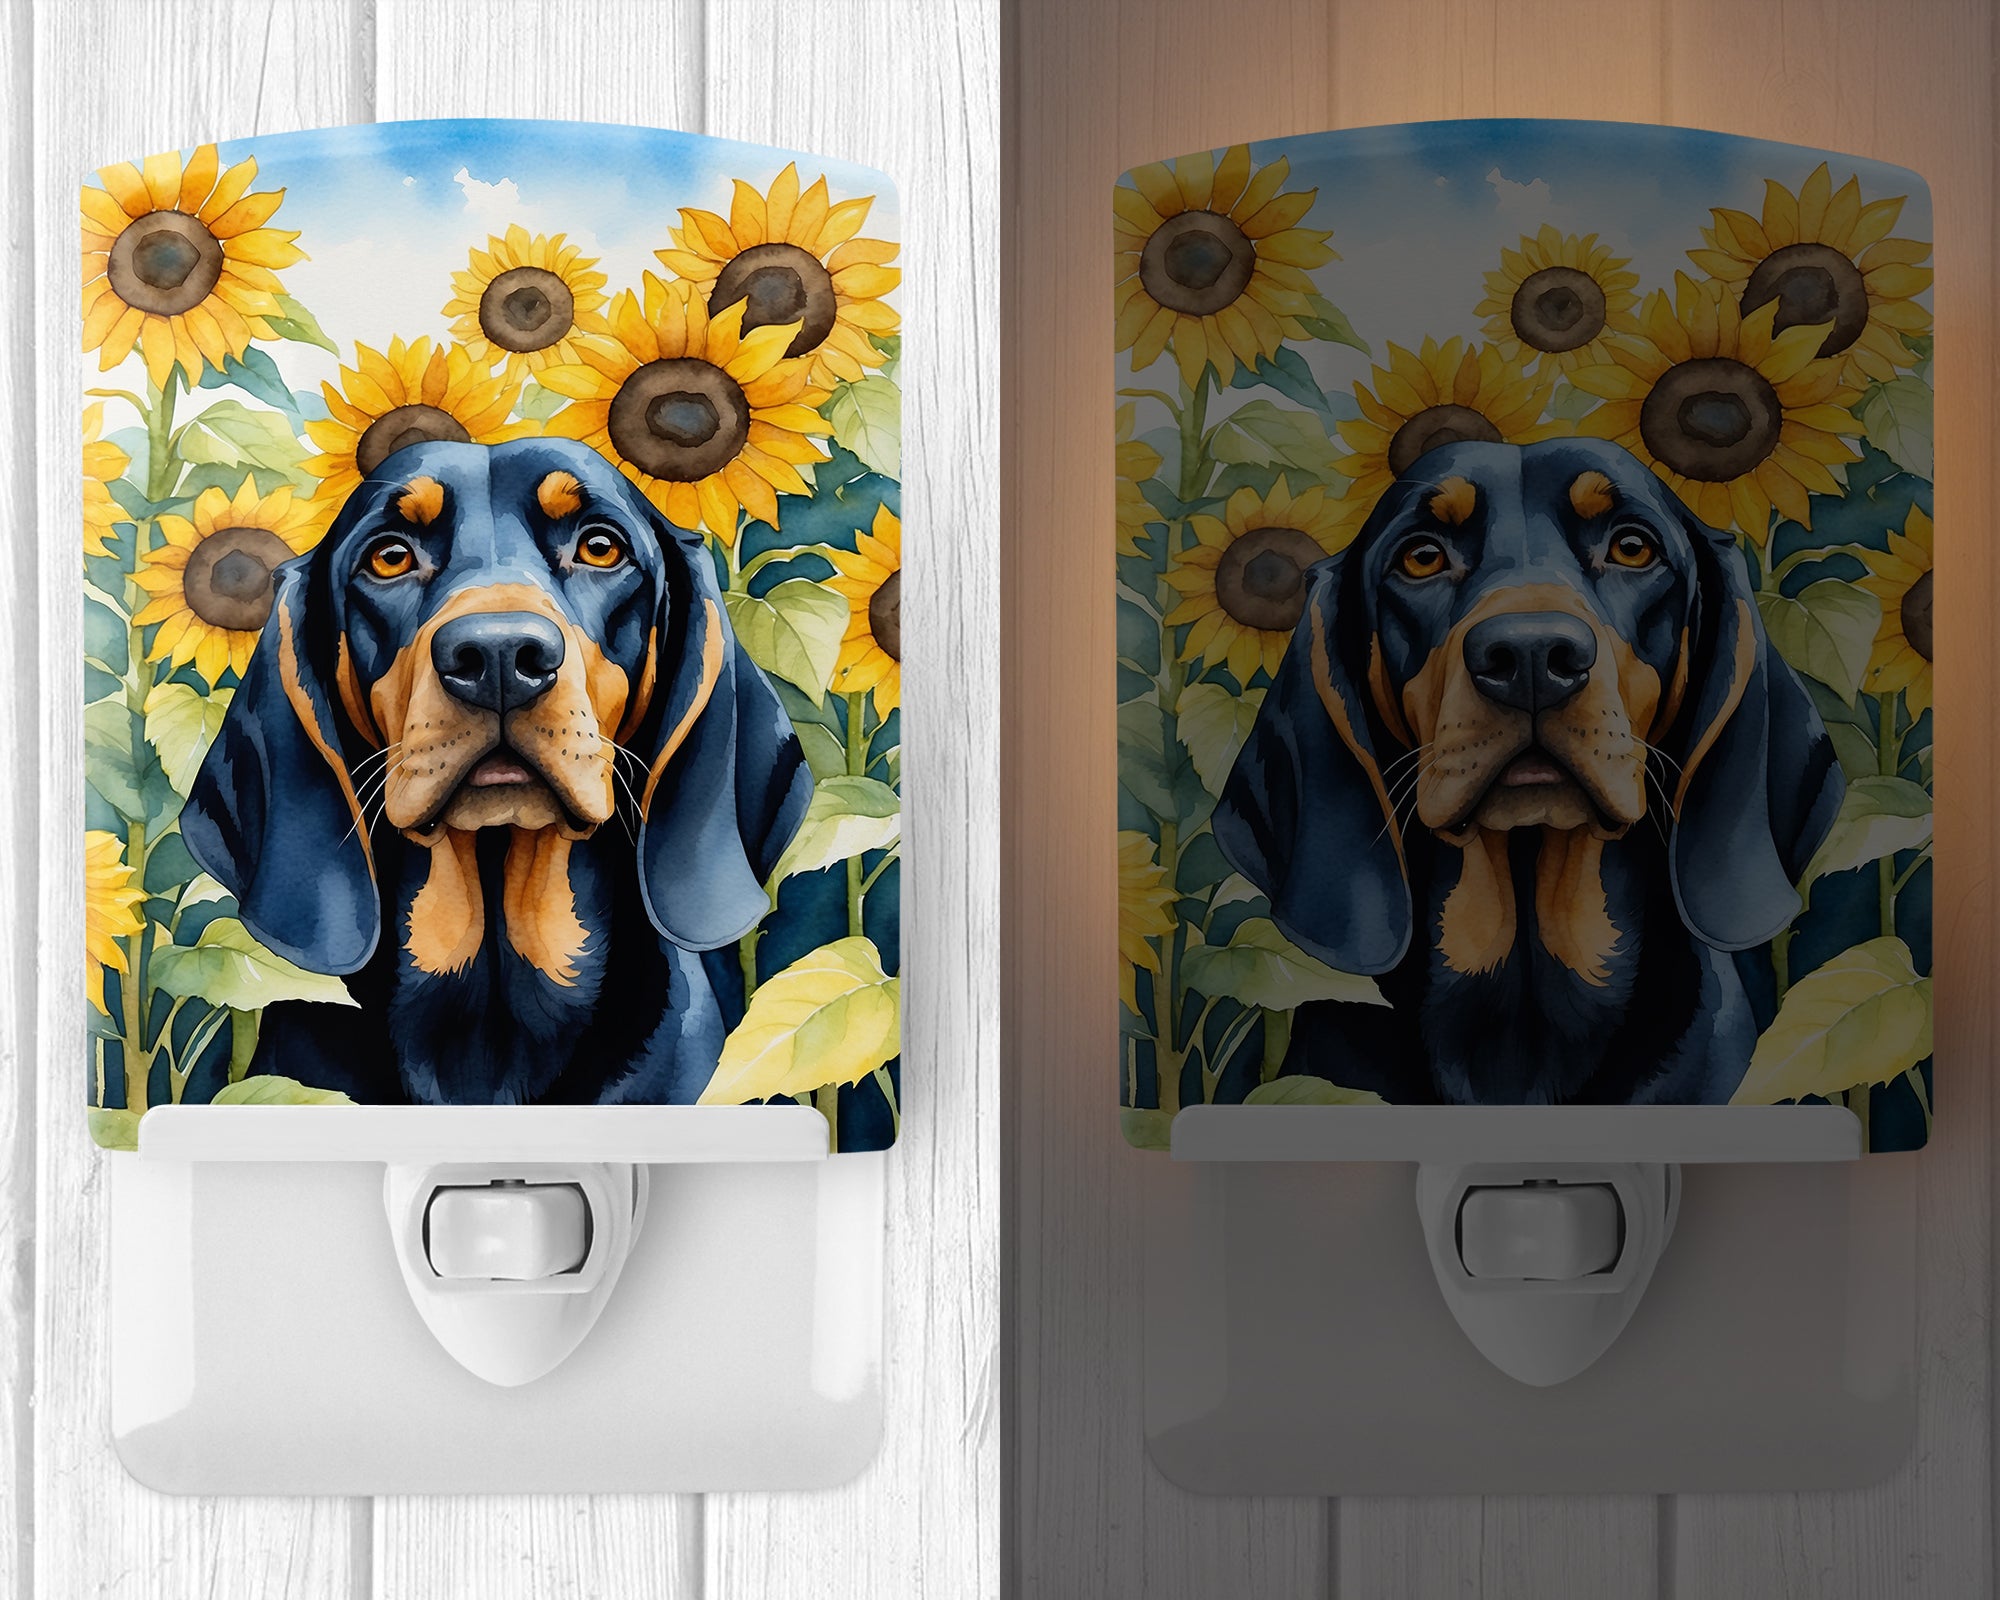 Black and Tan Coonhound in Sunflowers Ceramic Night Light